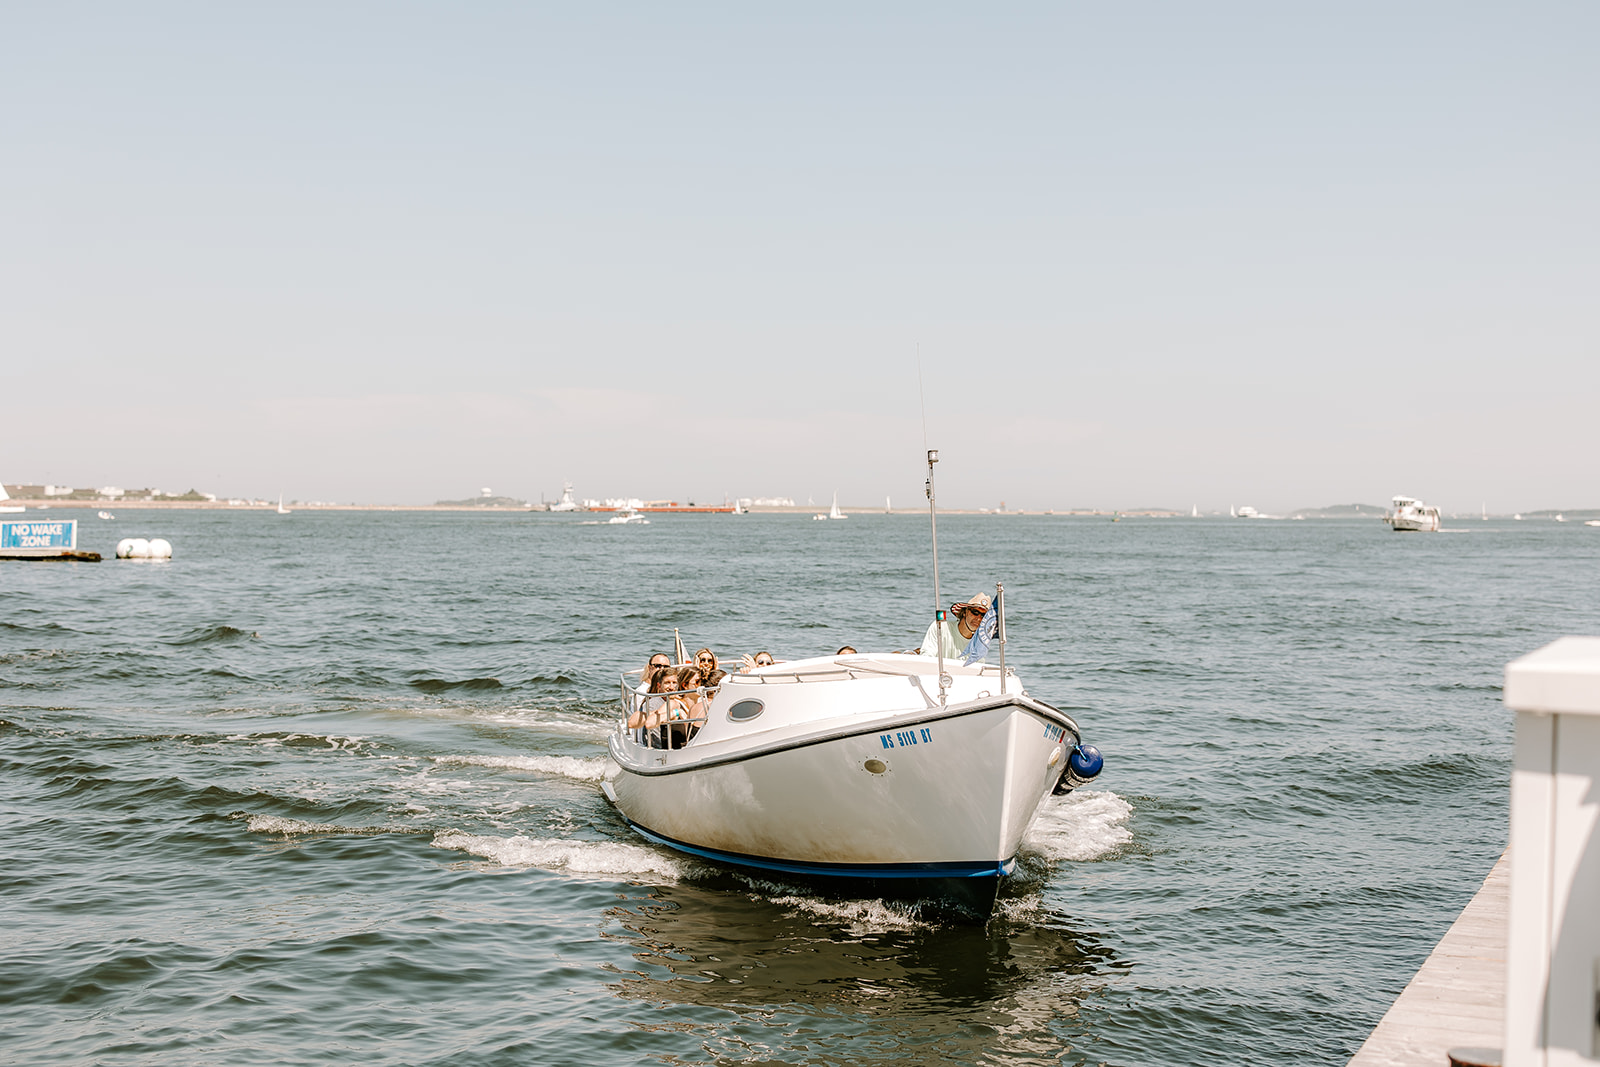 Boat arrives on a New England wedding day